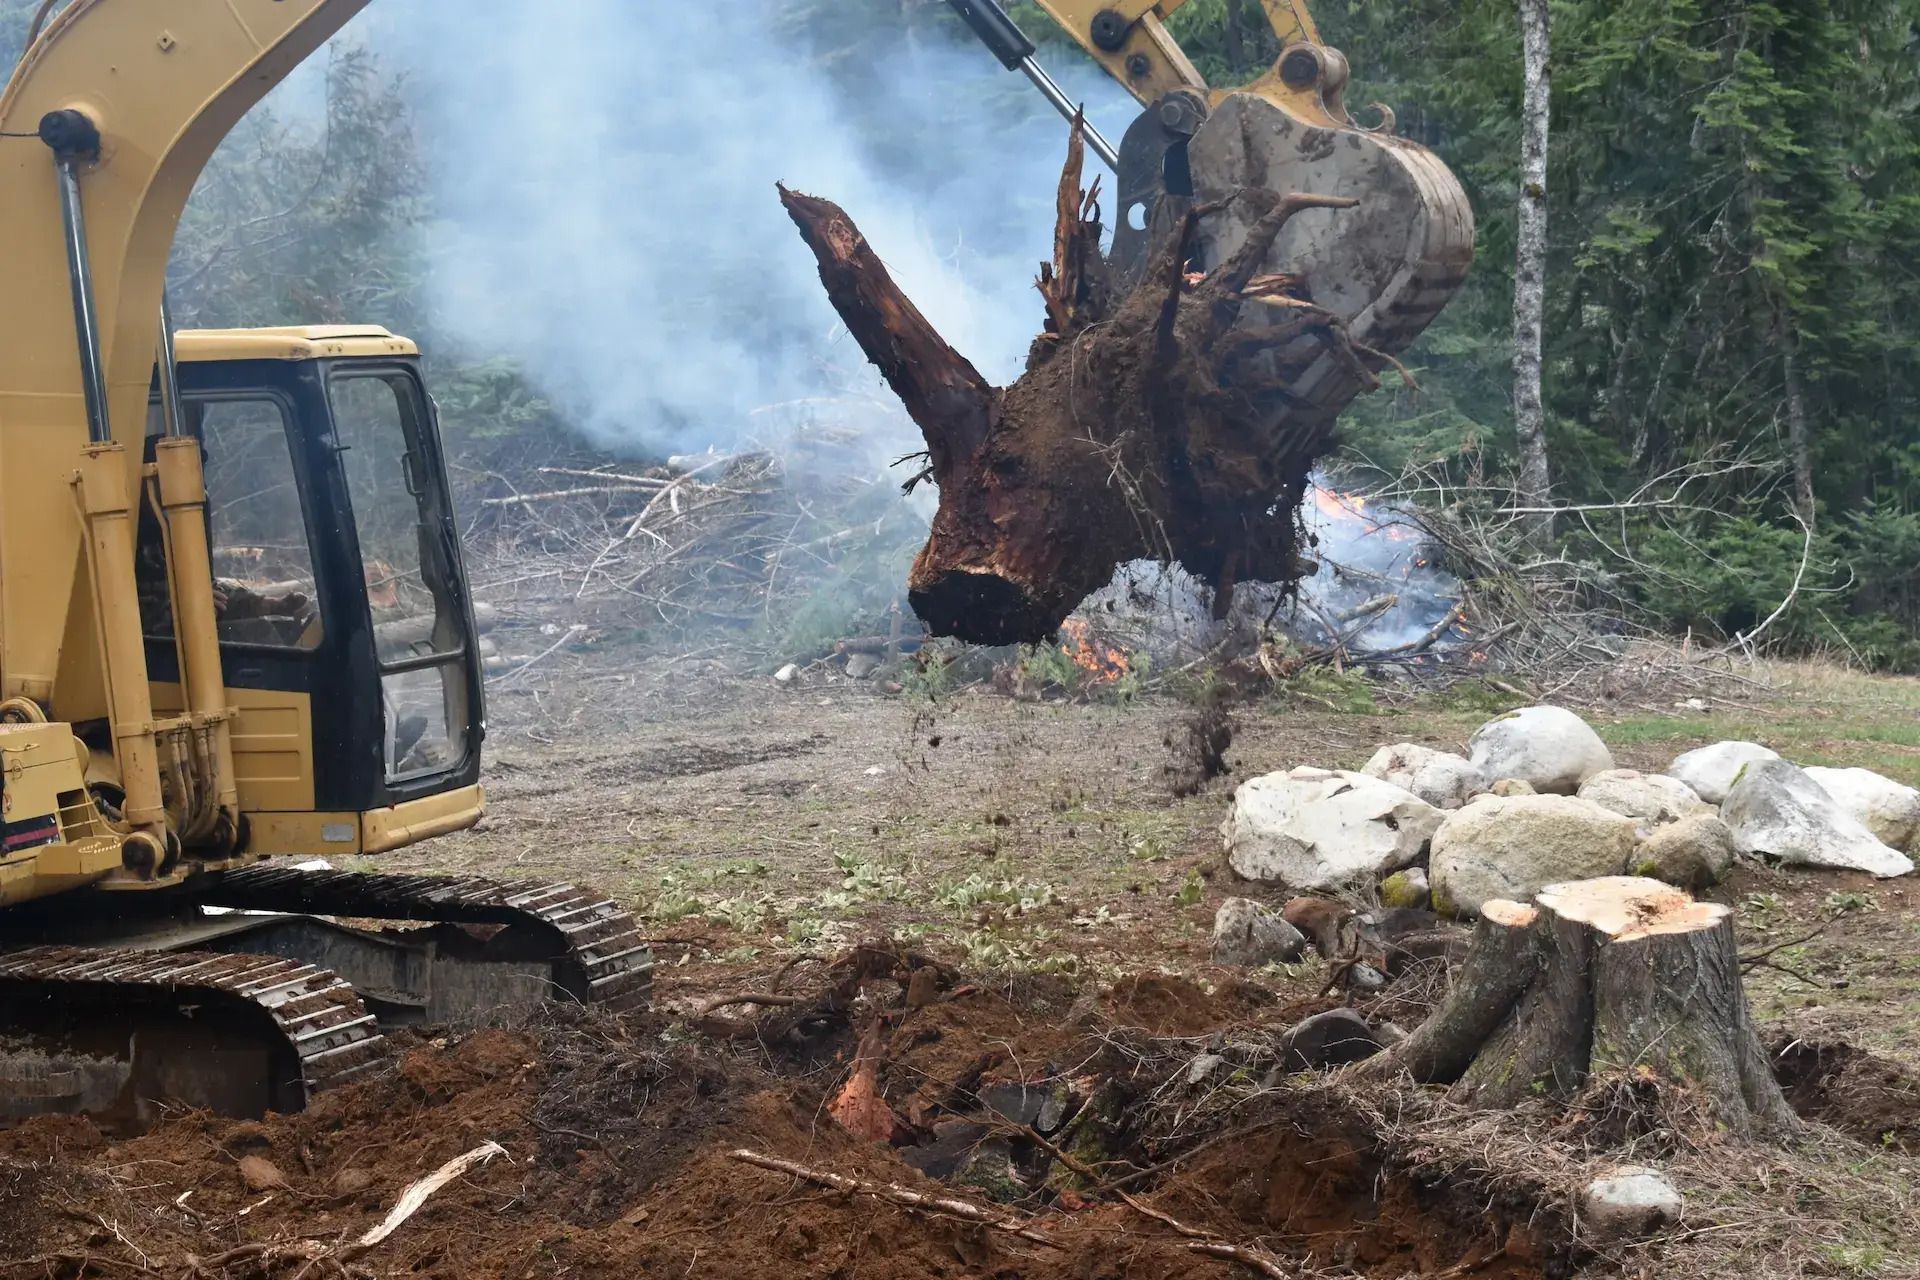 A bulldozer is carrying a large tree stump in its bucket